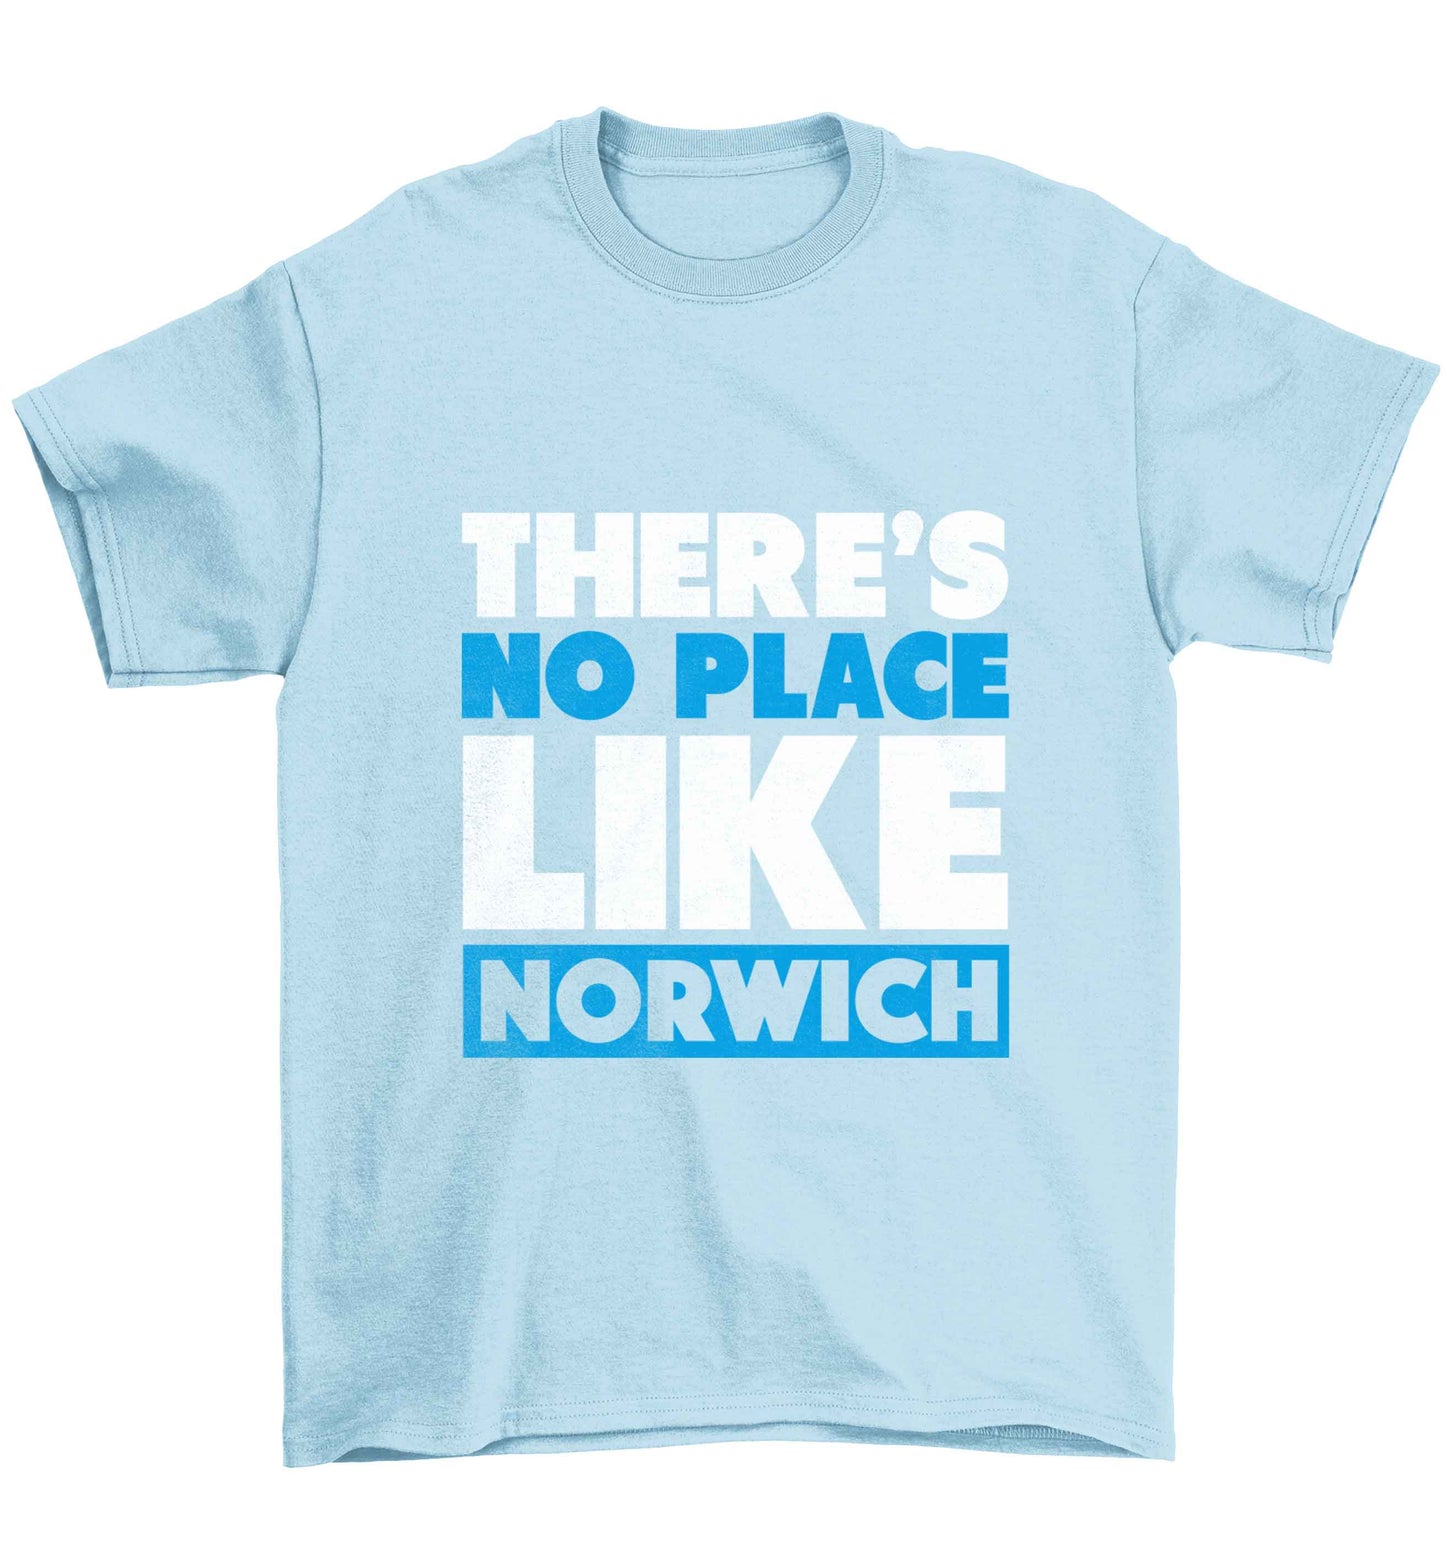 There's no place like Norwich Children's light blue Tshirt 12-13 Years